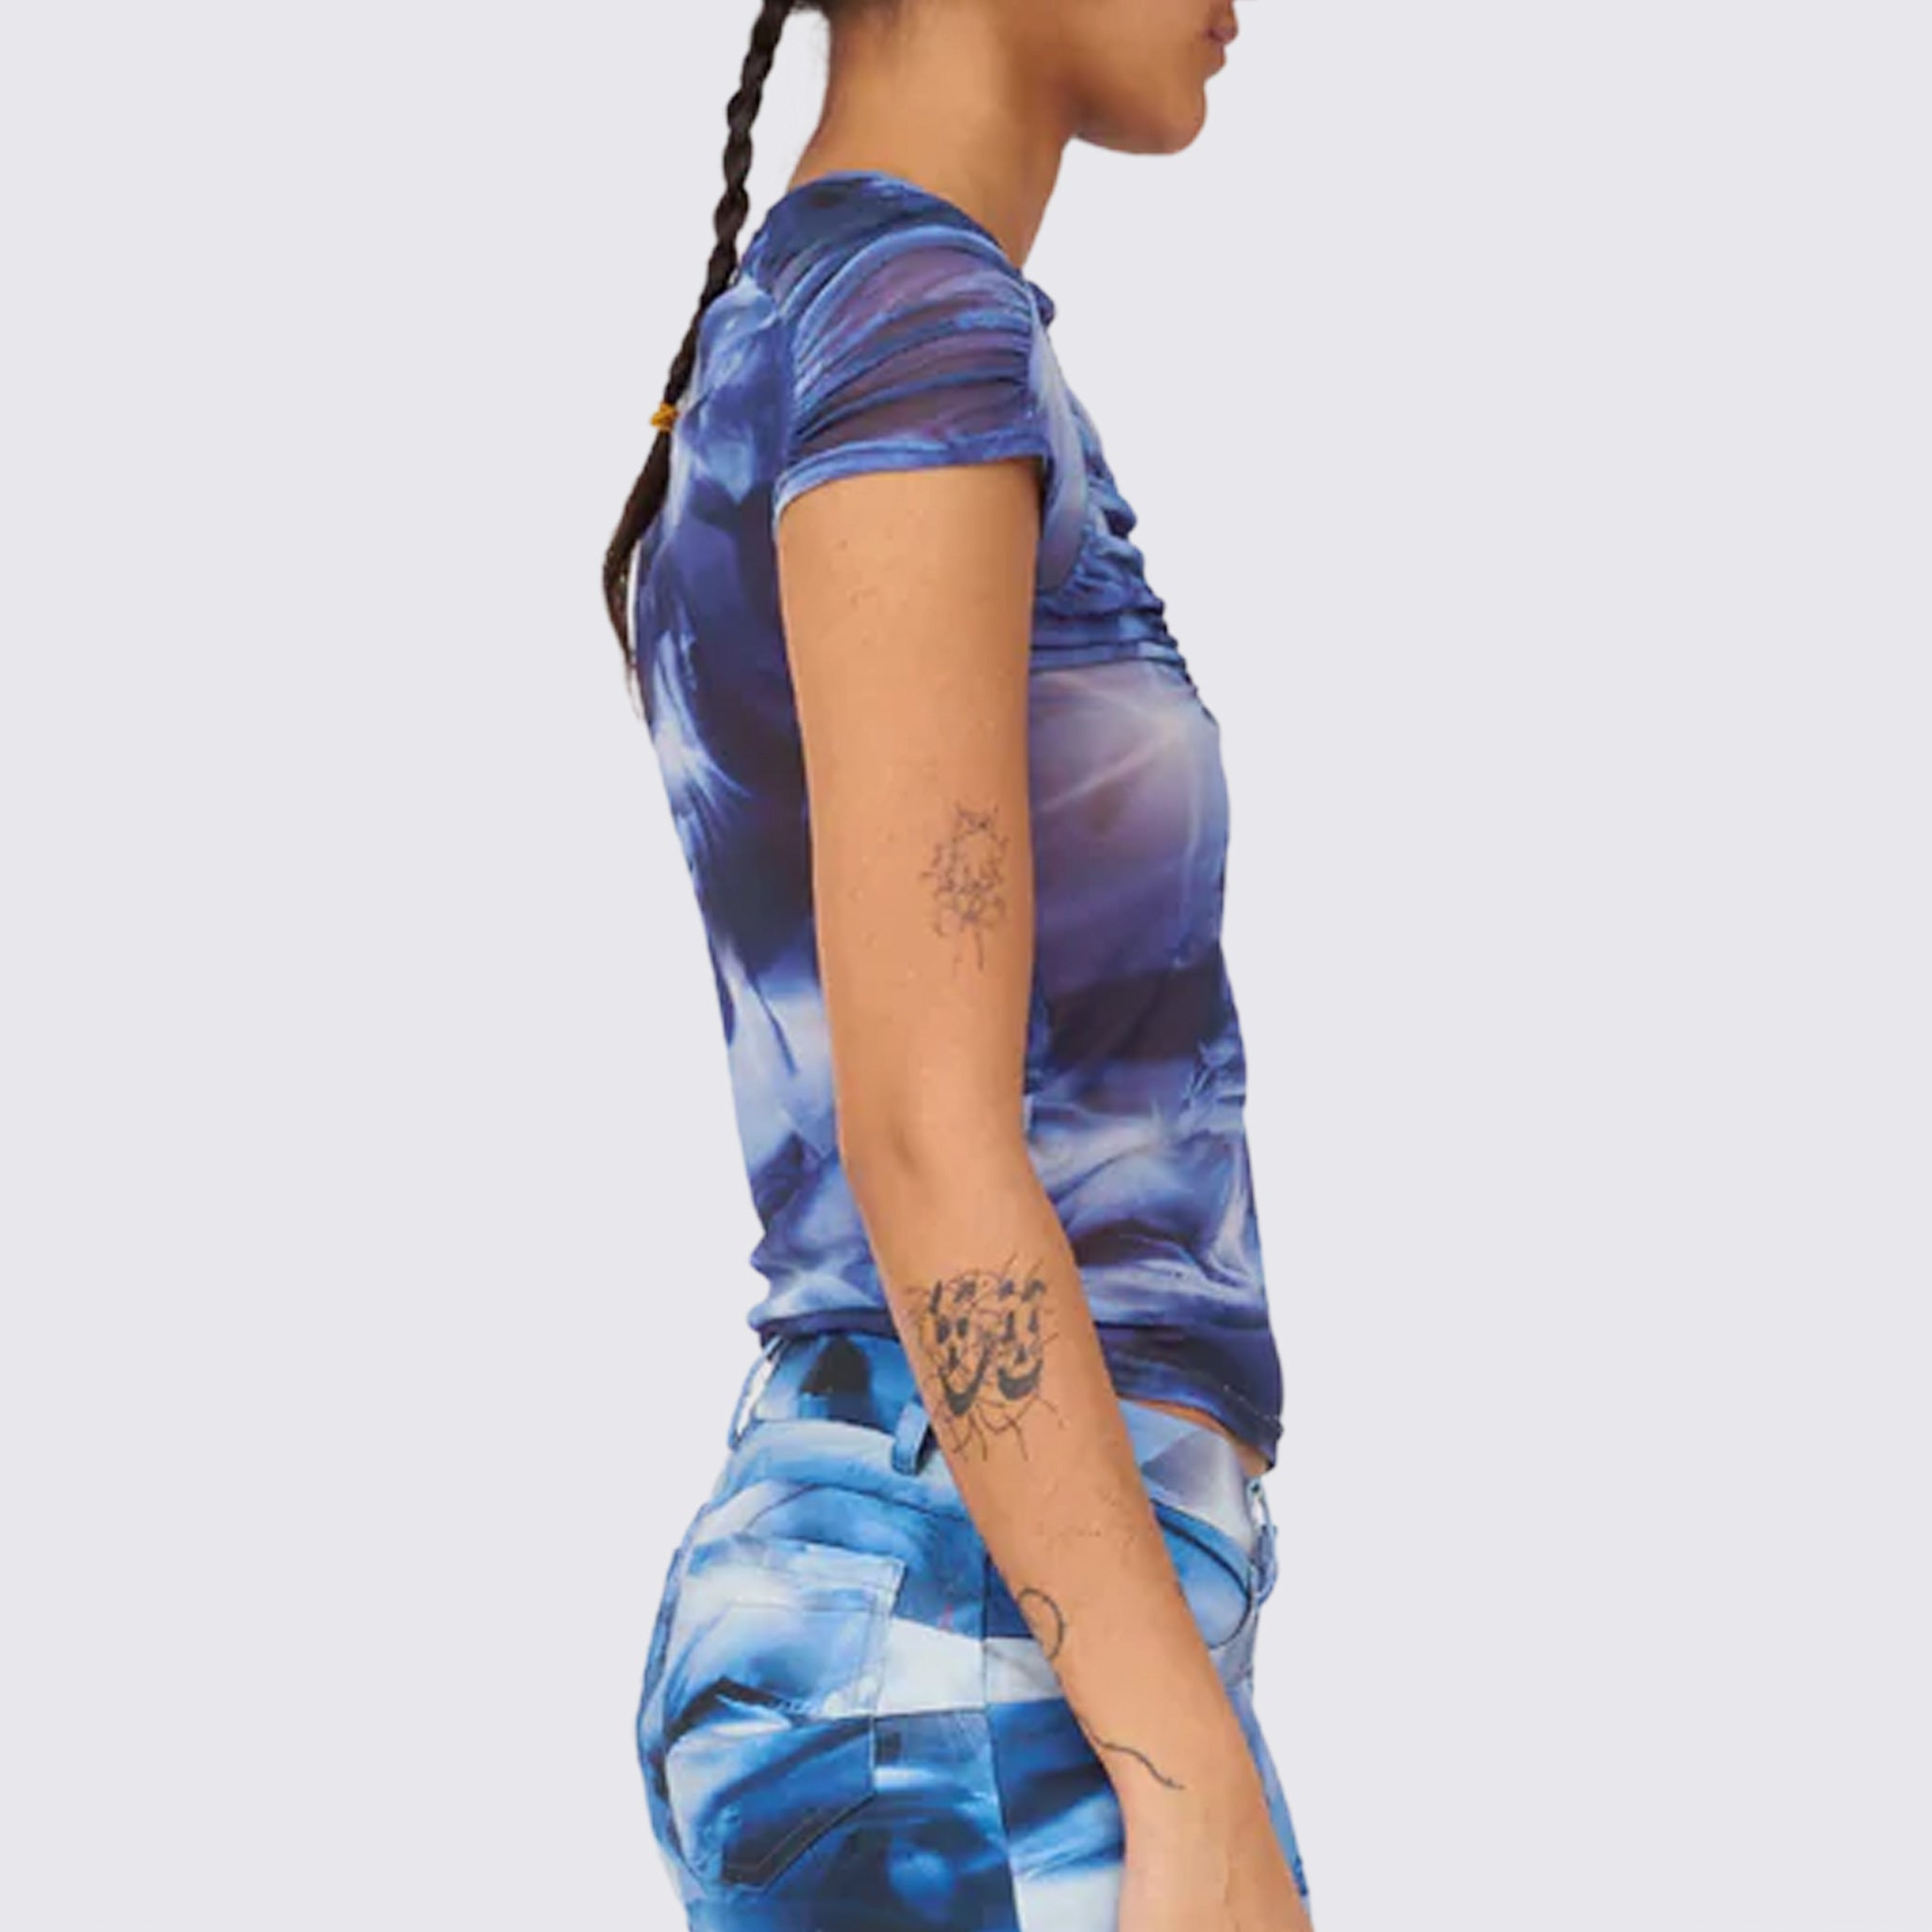 A model wears the blue and white graphic printed mesh Arc top, with ruching details along the chest and shoulders, side view.